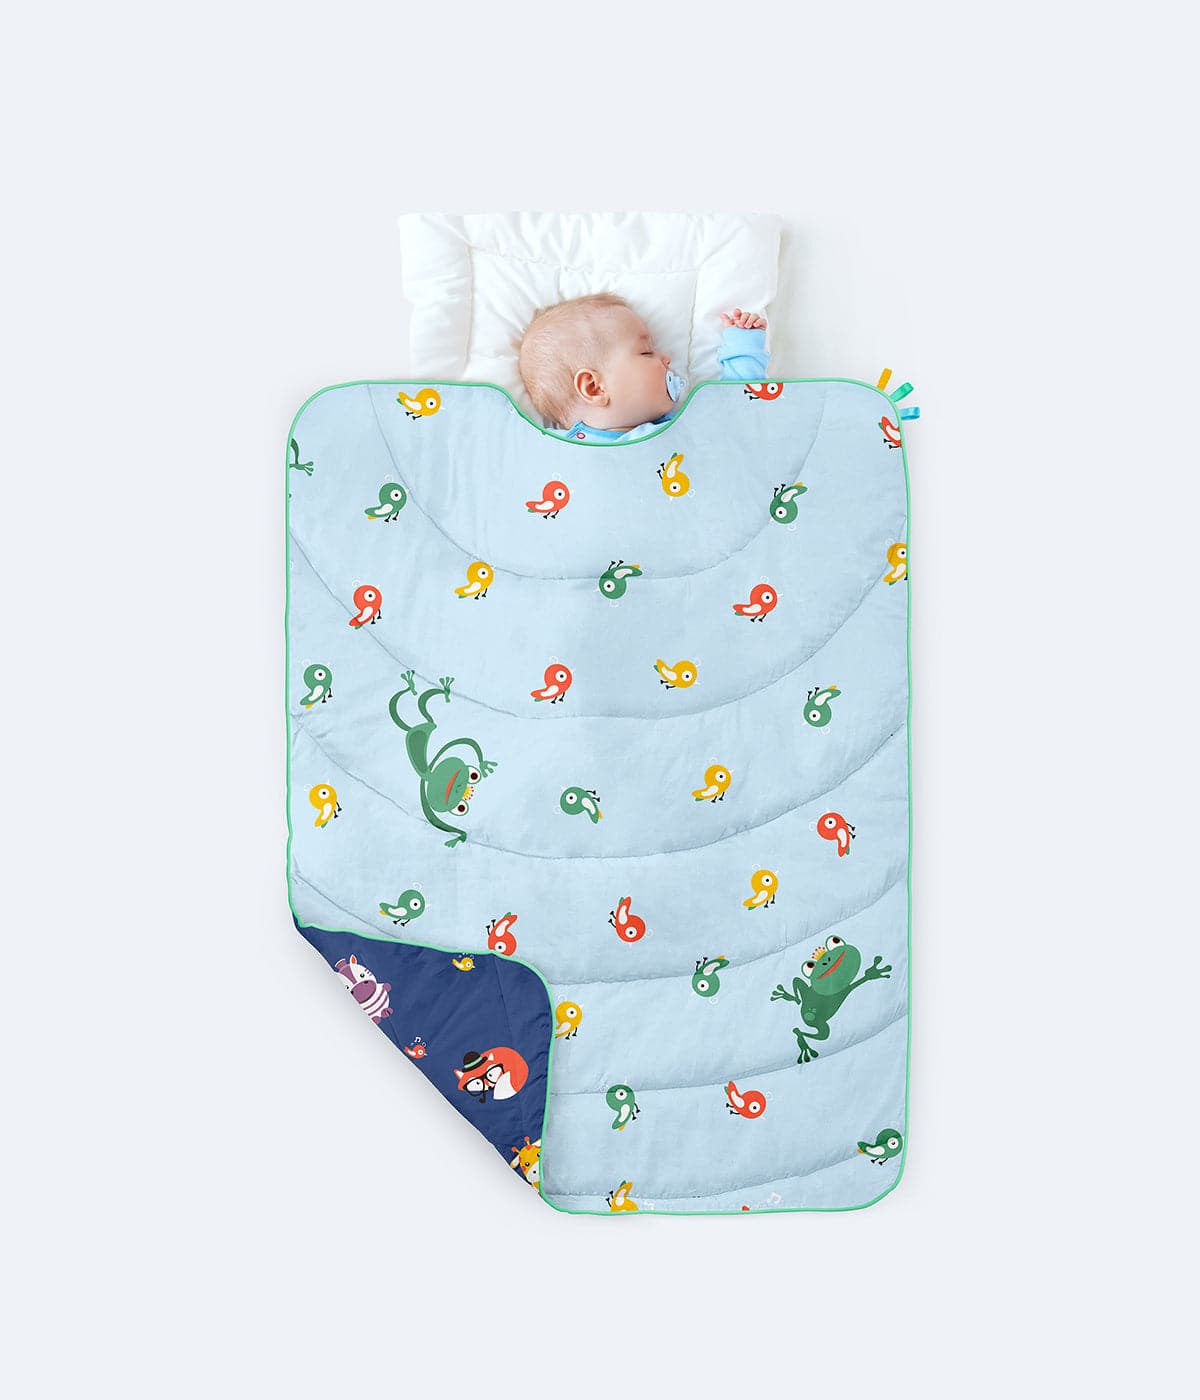 Baby's first festive gift set